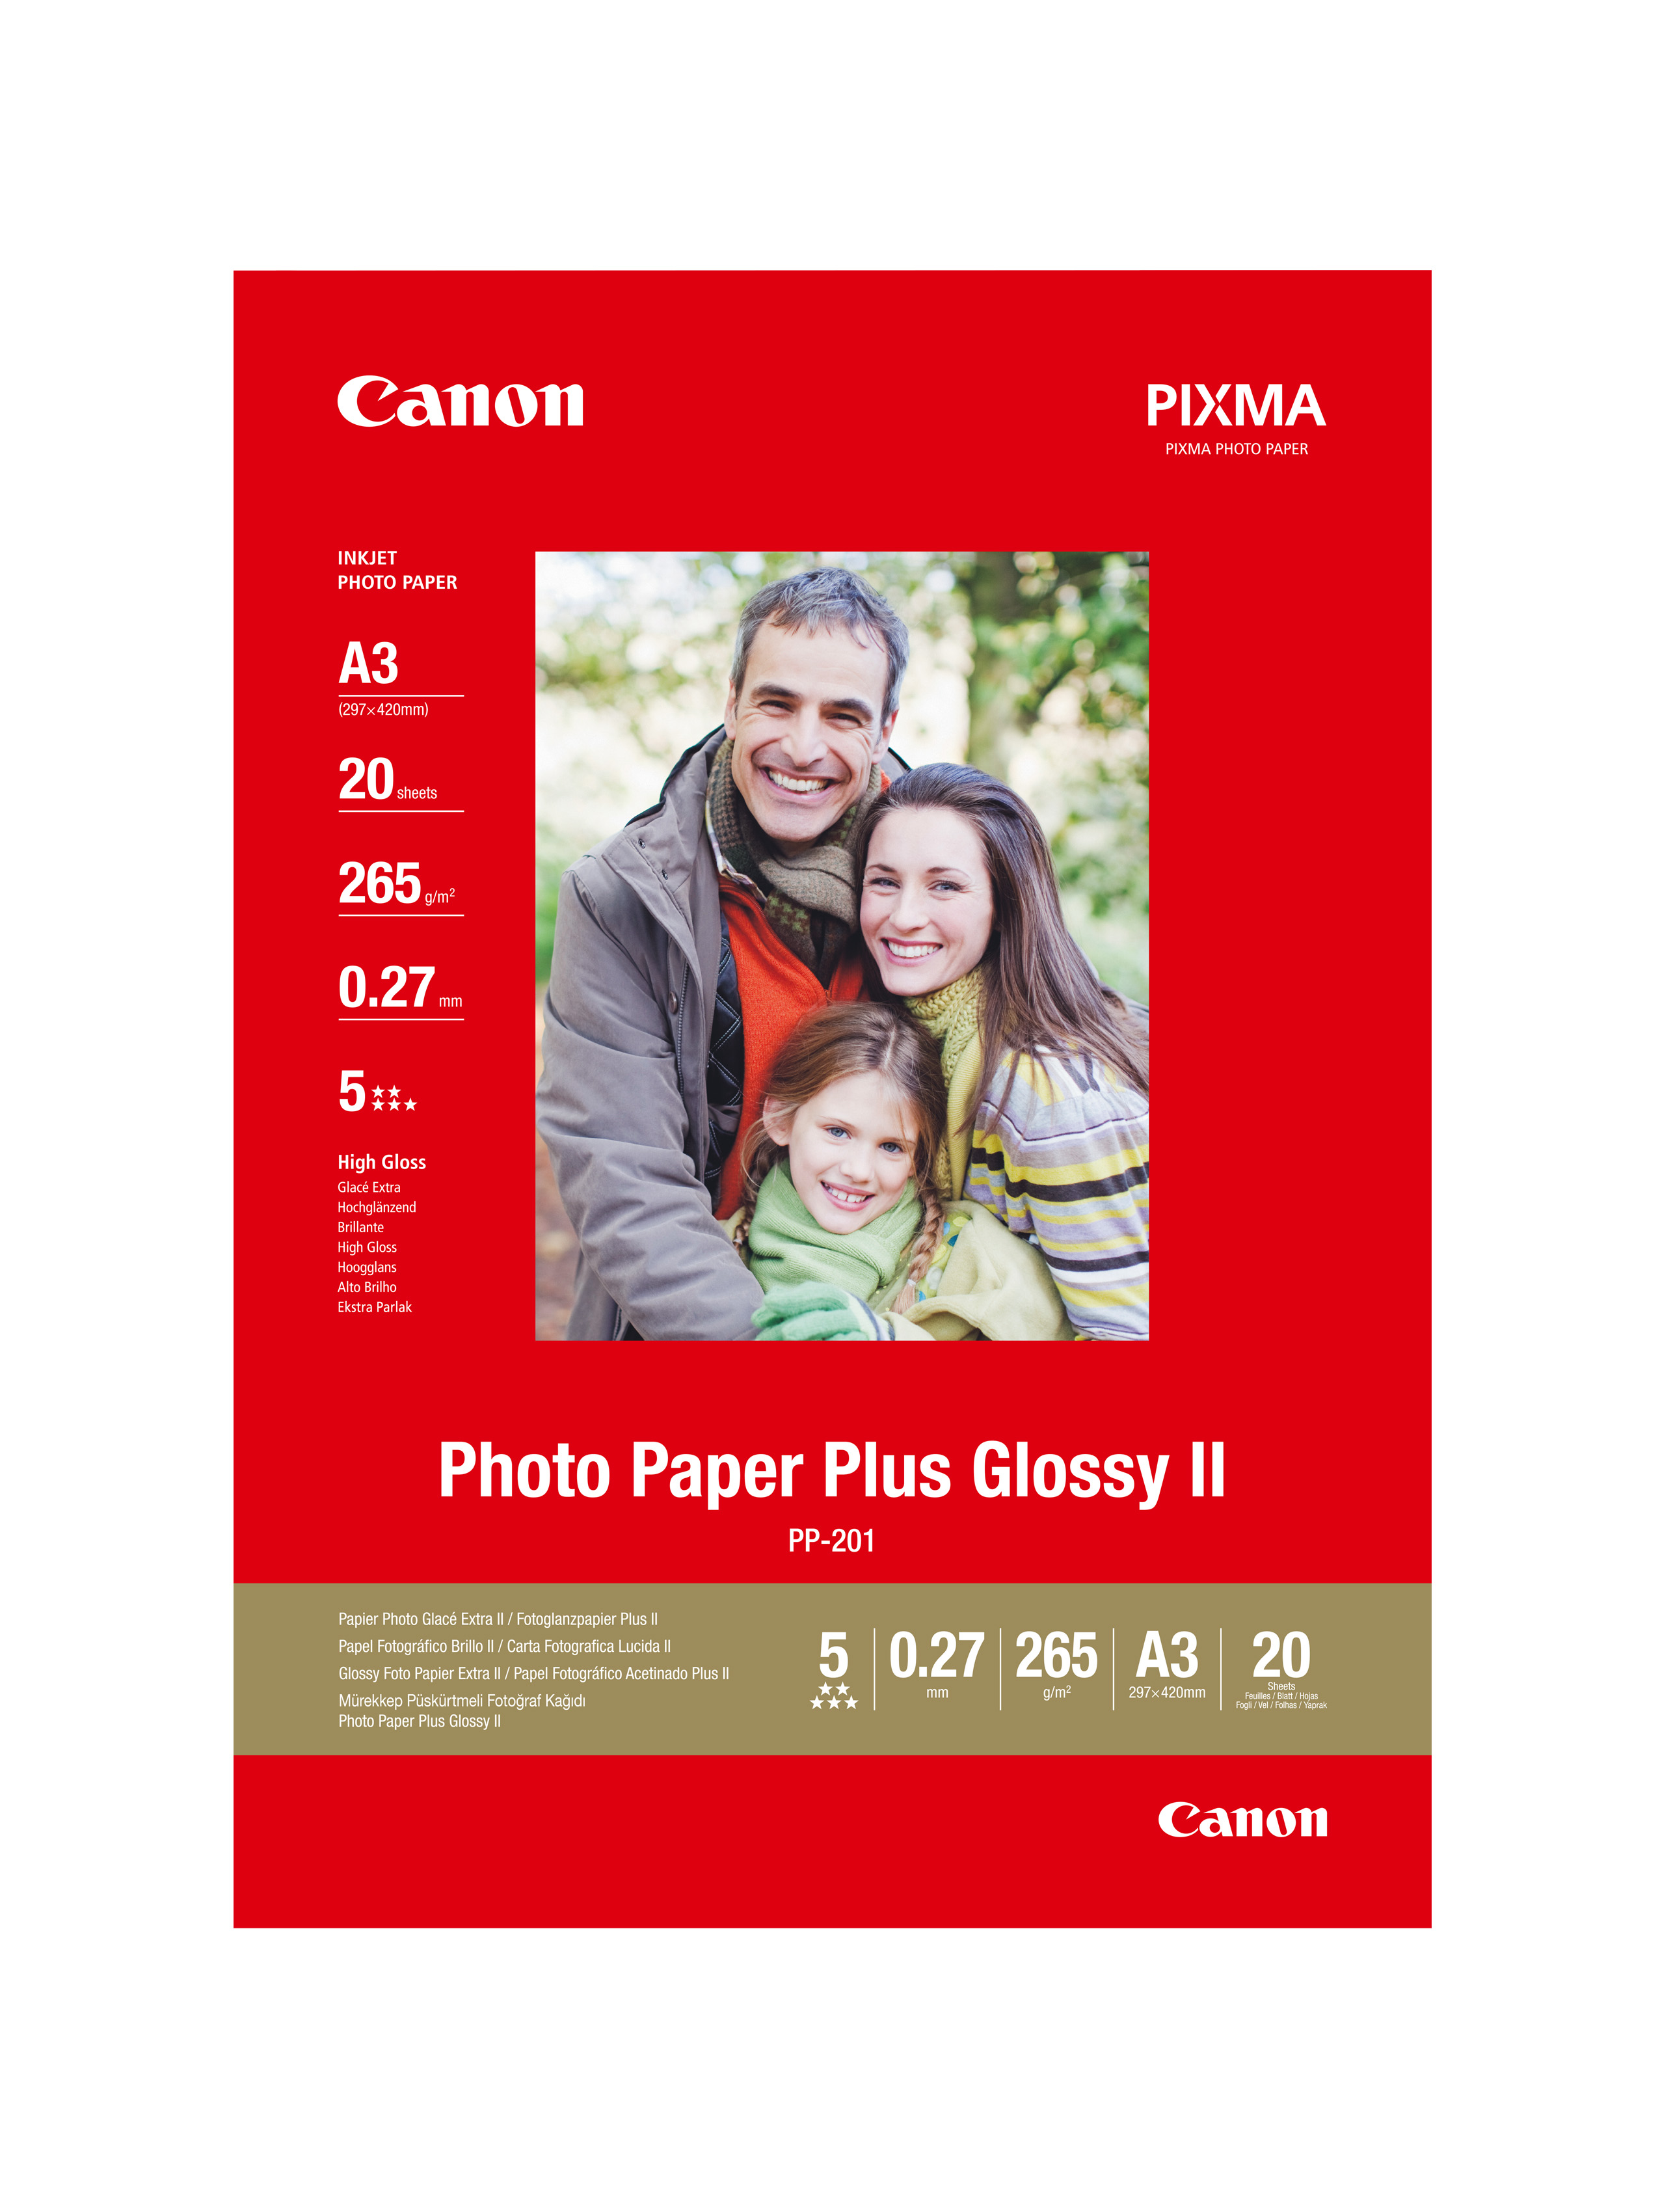 CANON Photo Paper Plus 265g A3 PP201A3 InkJet glossy II 20 feuilles